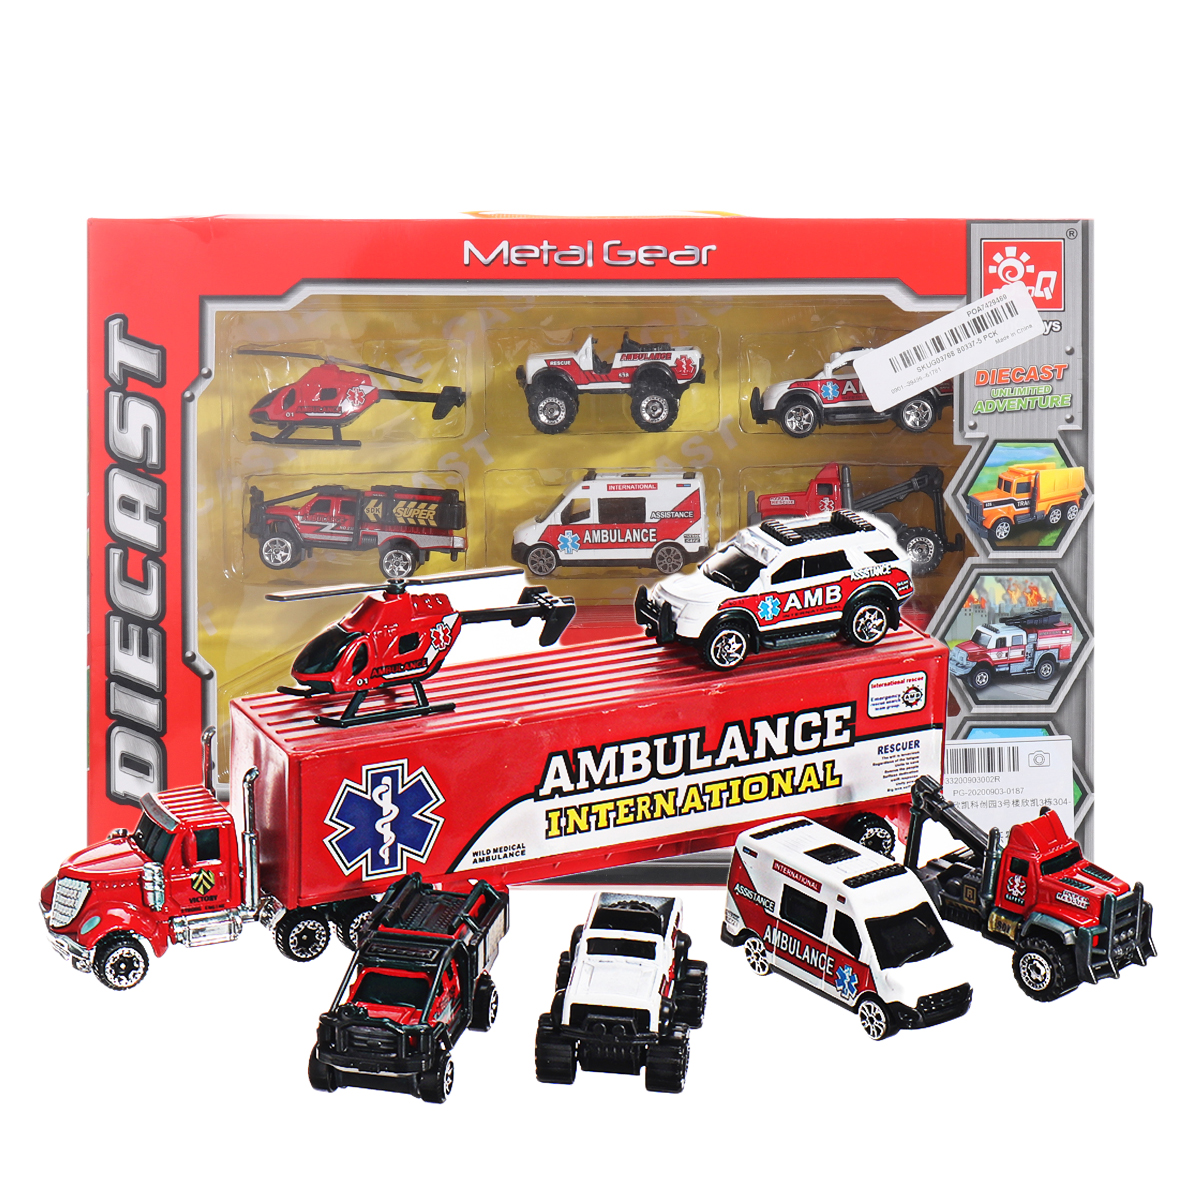 7-PCS-Alloy-Plastic-Diecast-Engineering-Vehicle-Ambulance-Polices-Car-Model-Toy-Set-for-Children-Gif-1769432-7